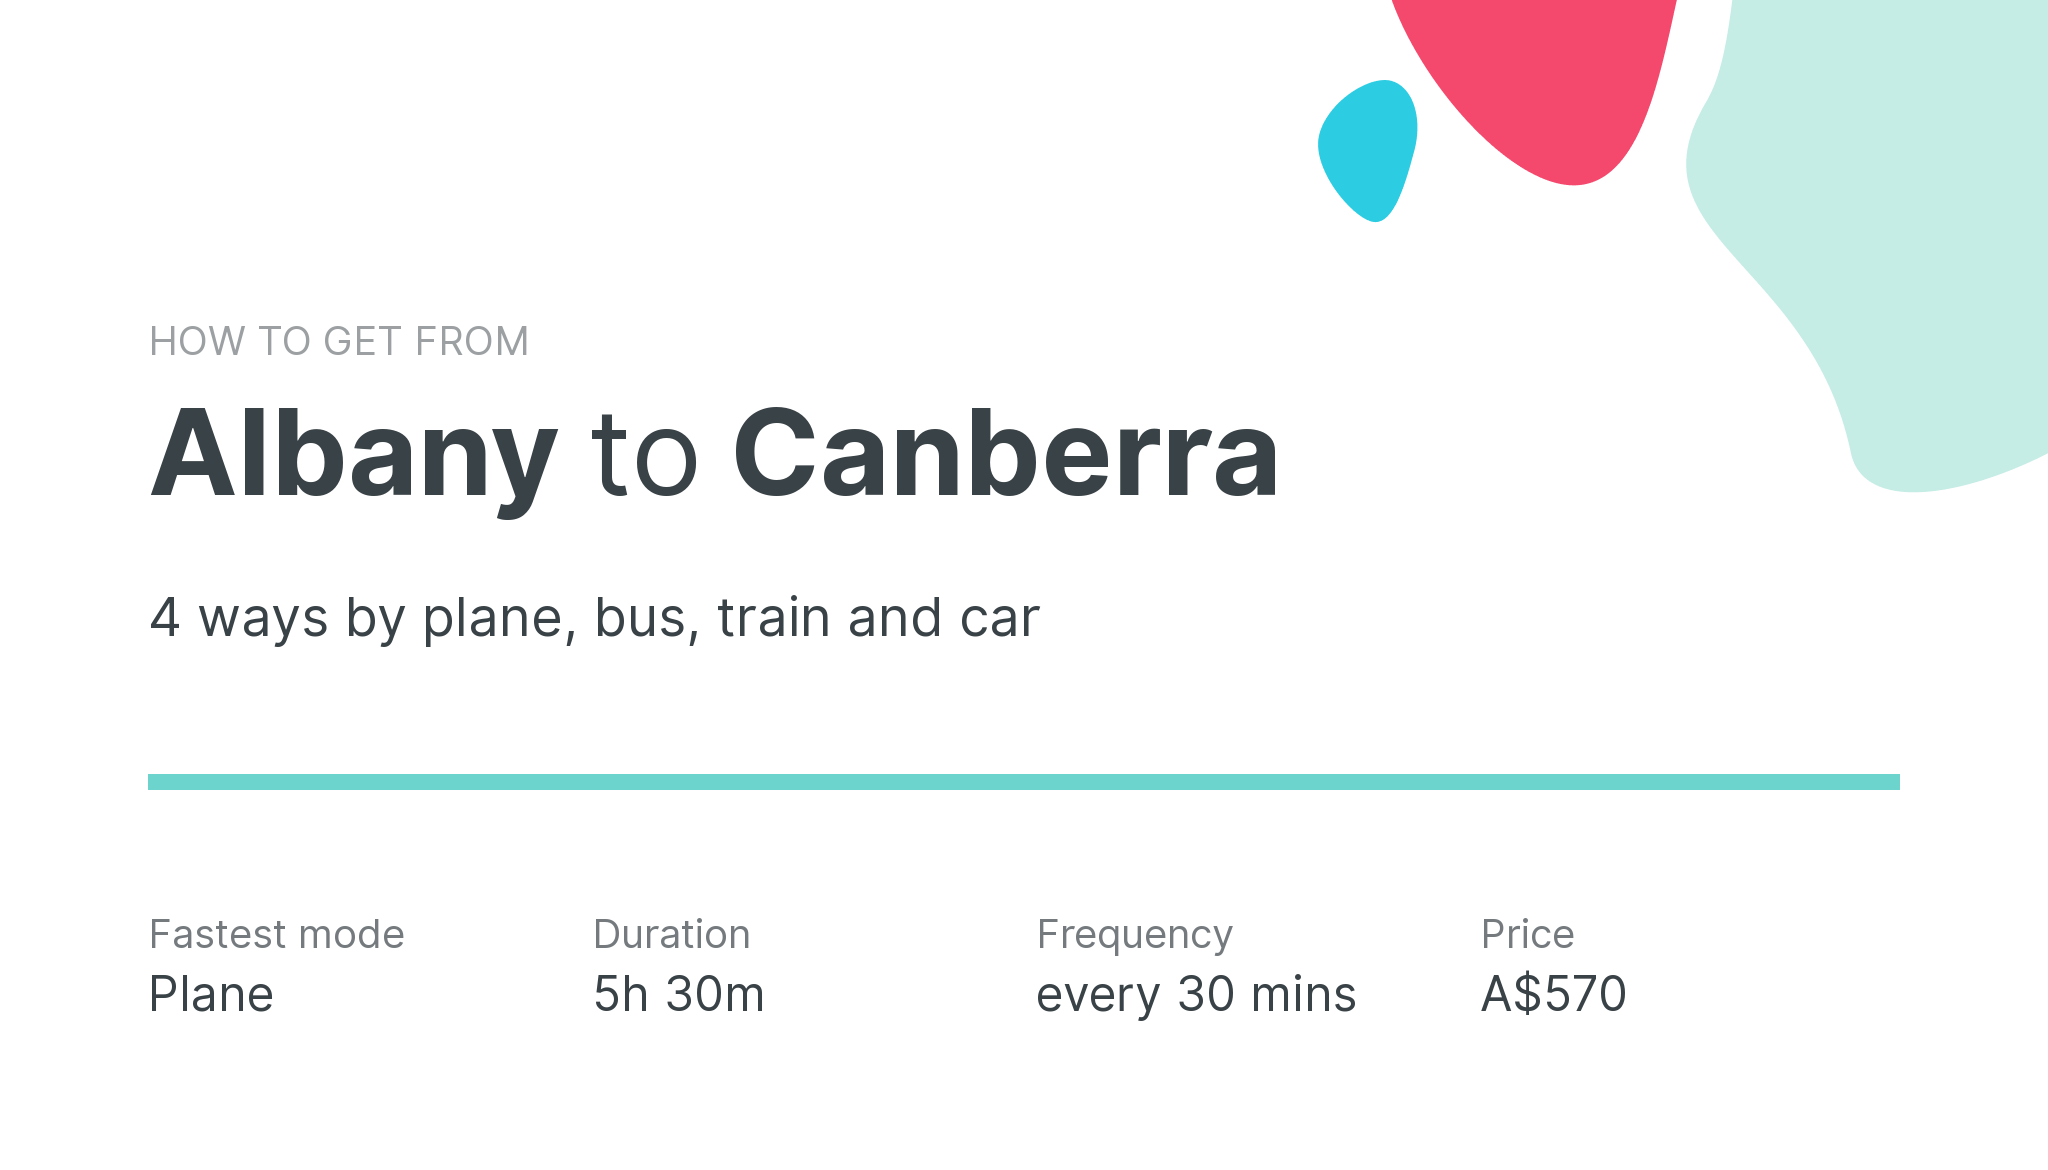 How do I get from Albany to Canberra